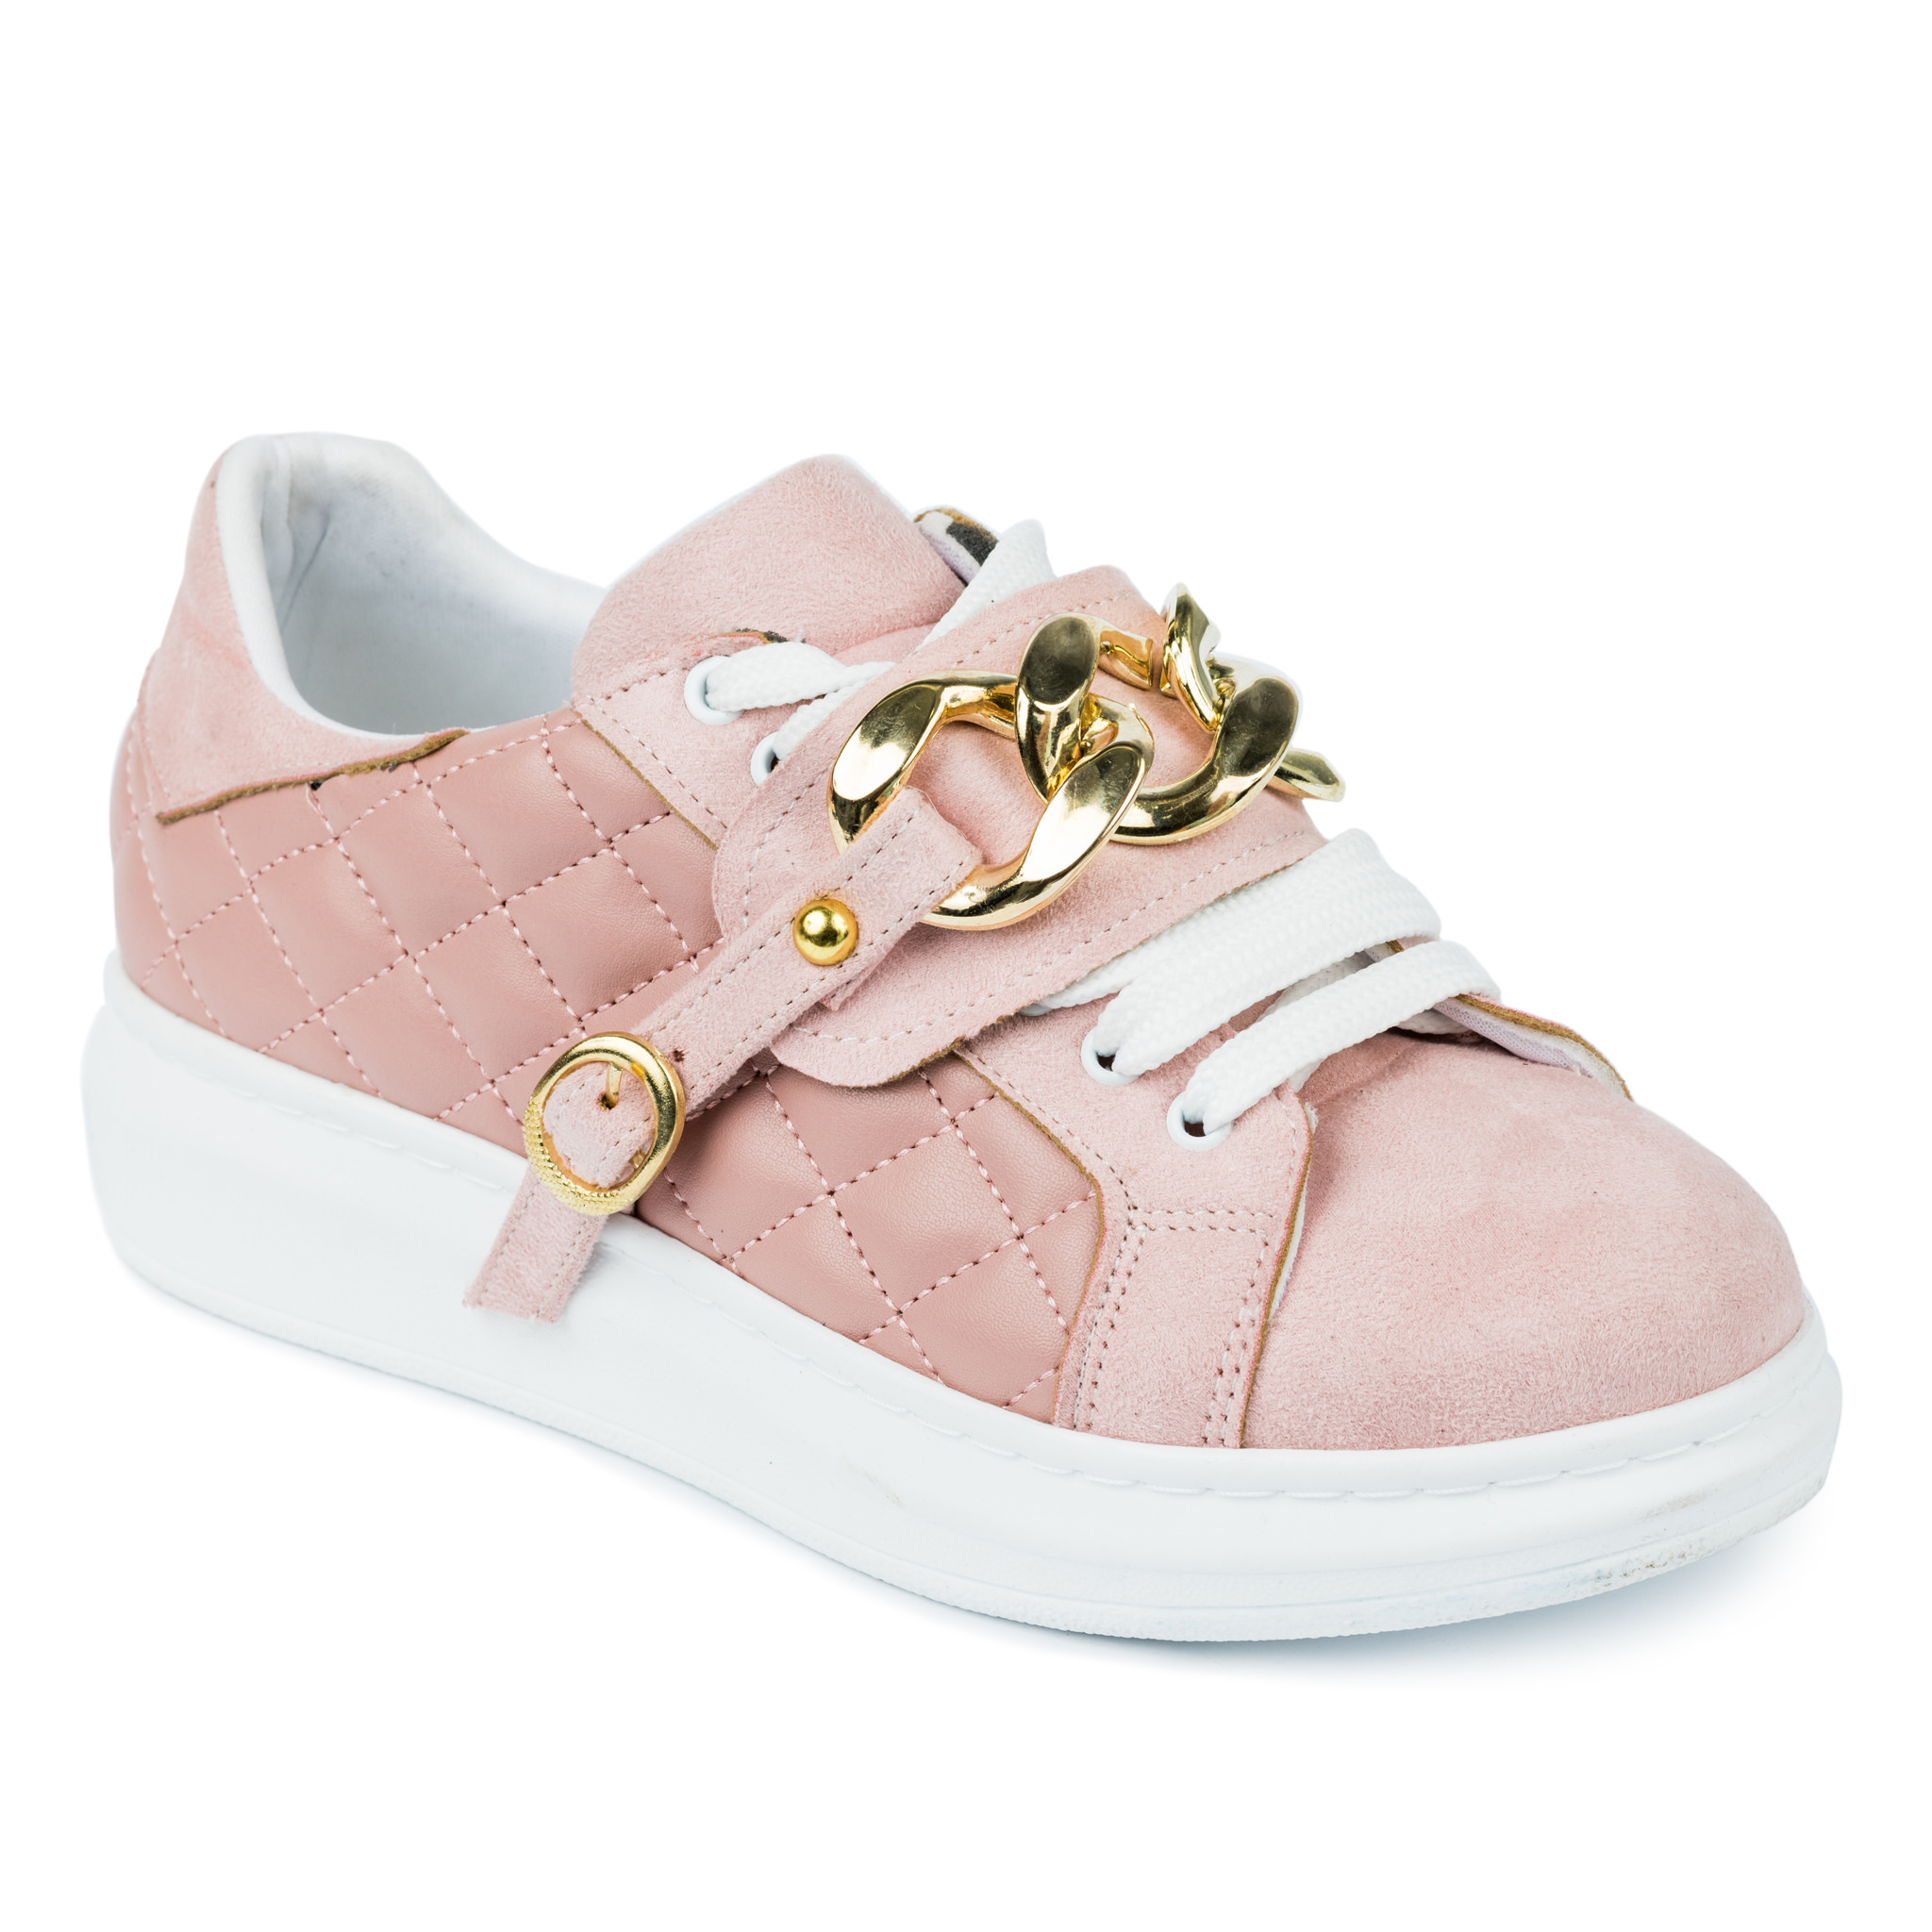 SAW SNEAKERS WITH CHAIN - ROSE